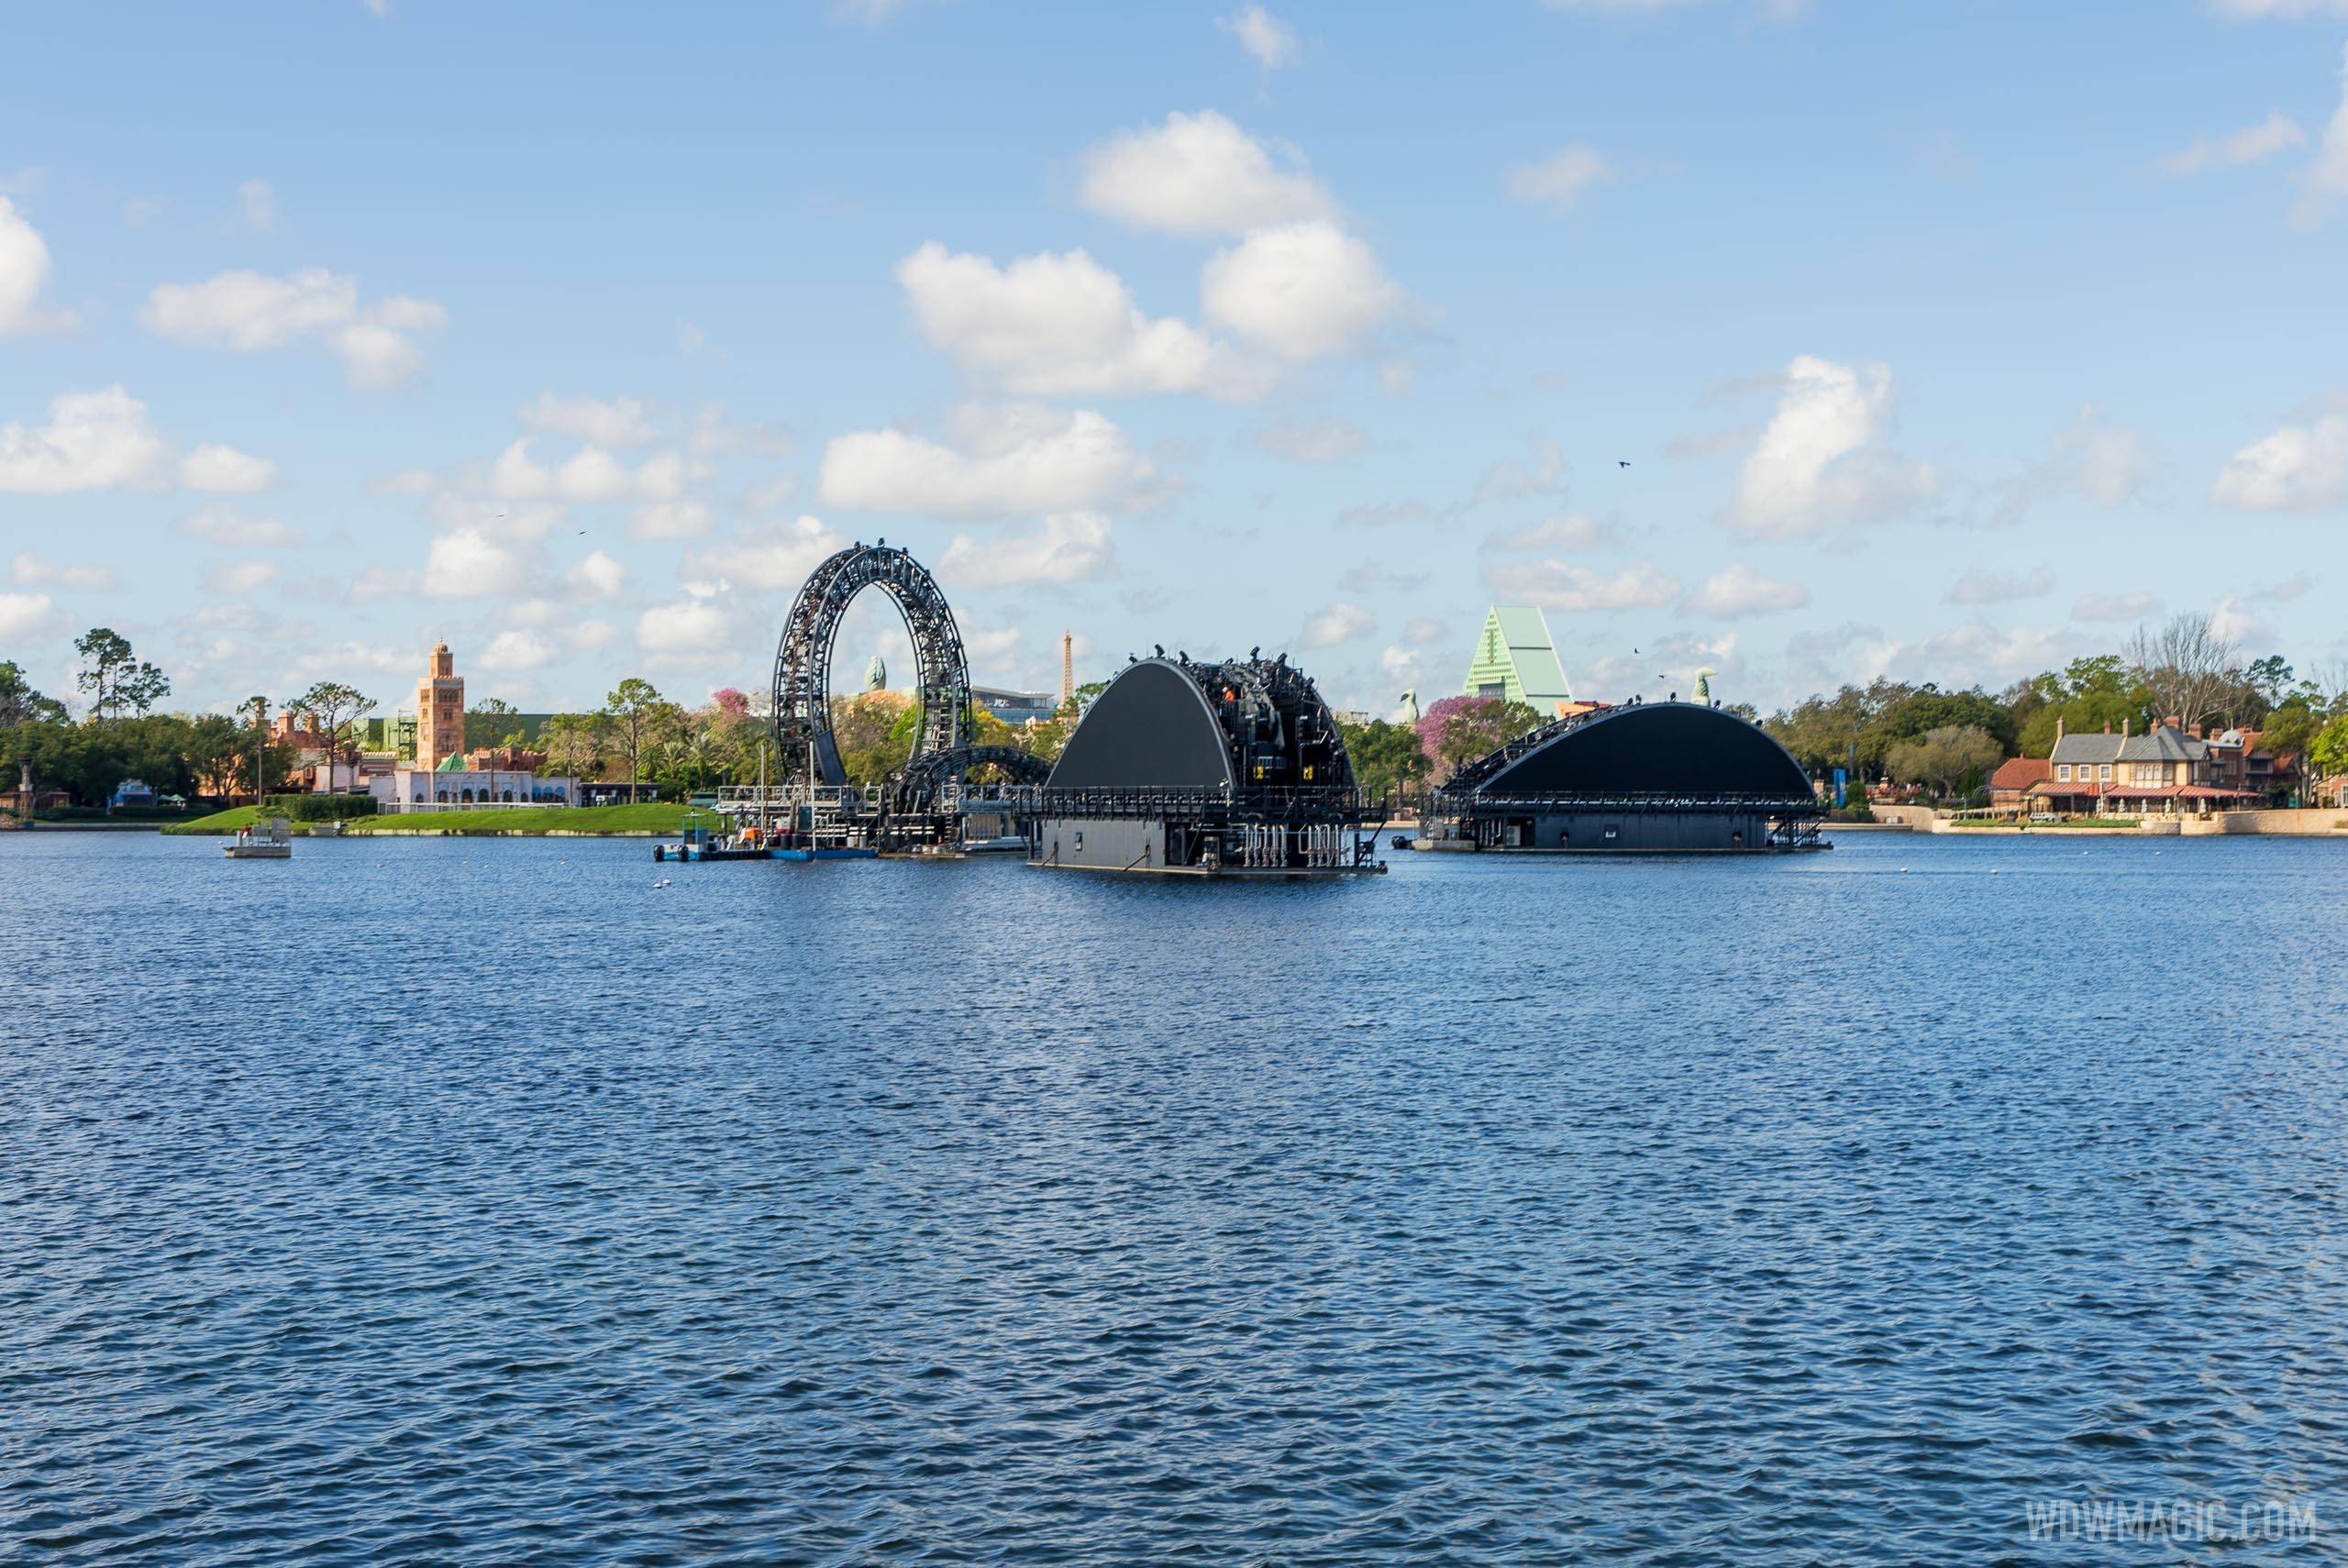 Daytime views of the Harmonious central icon barge